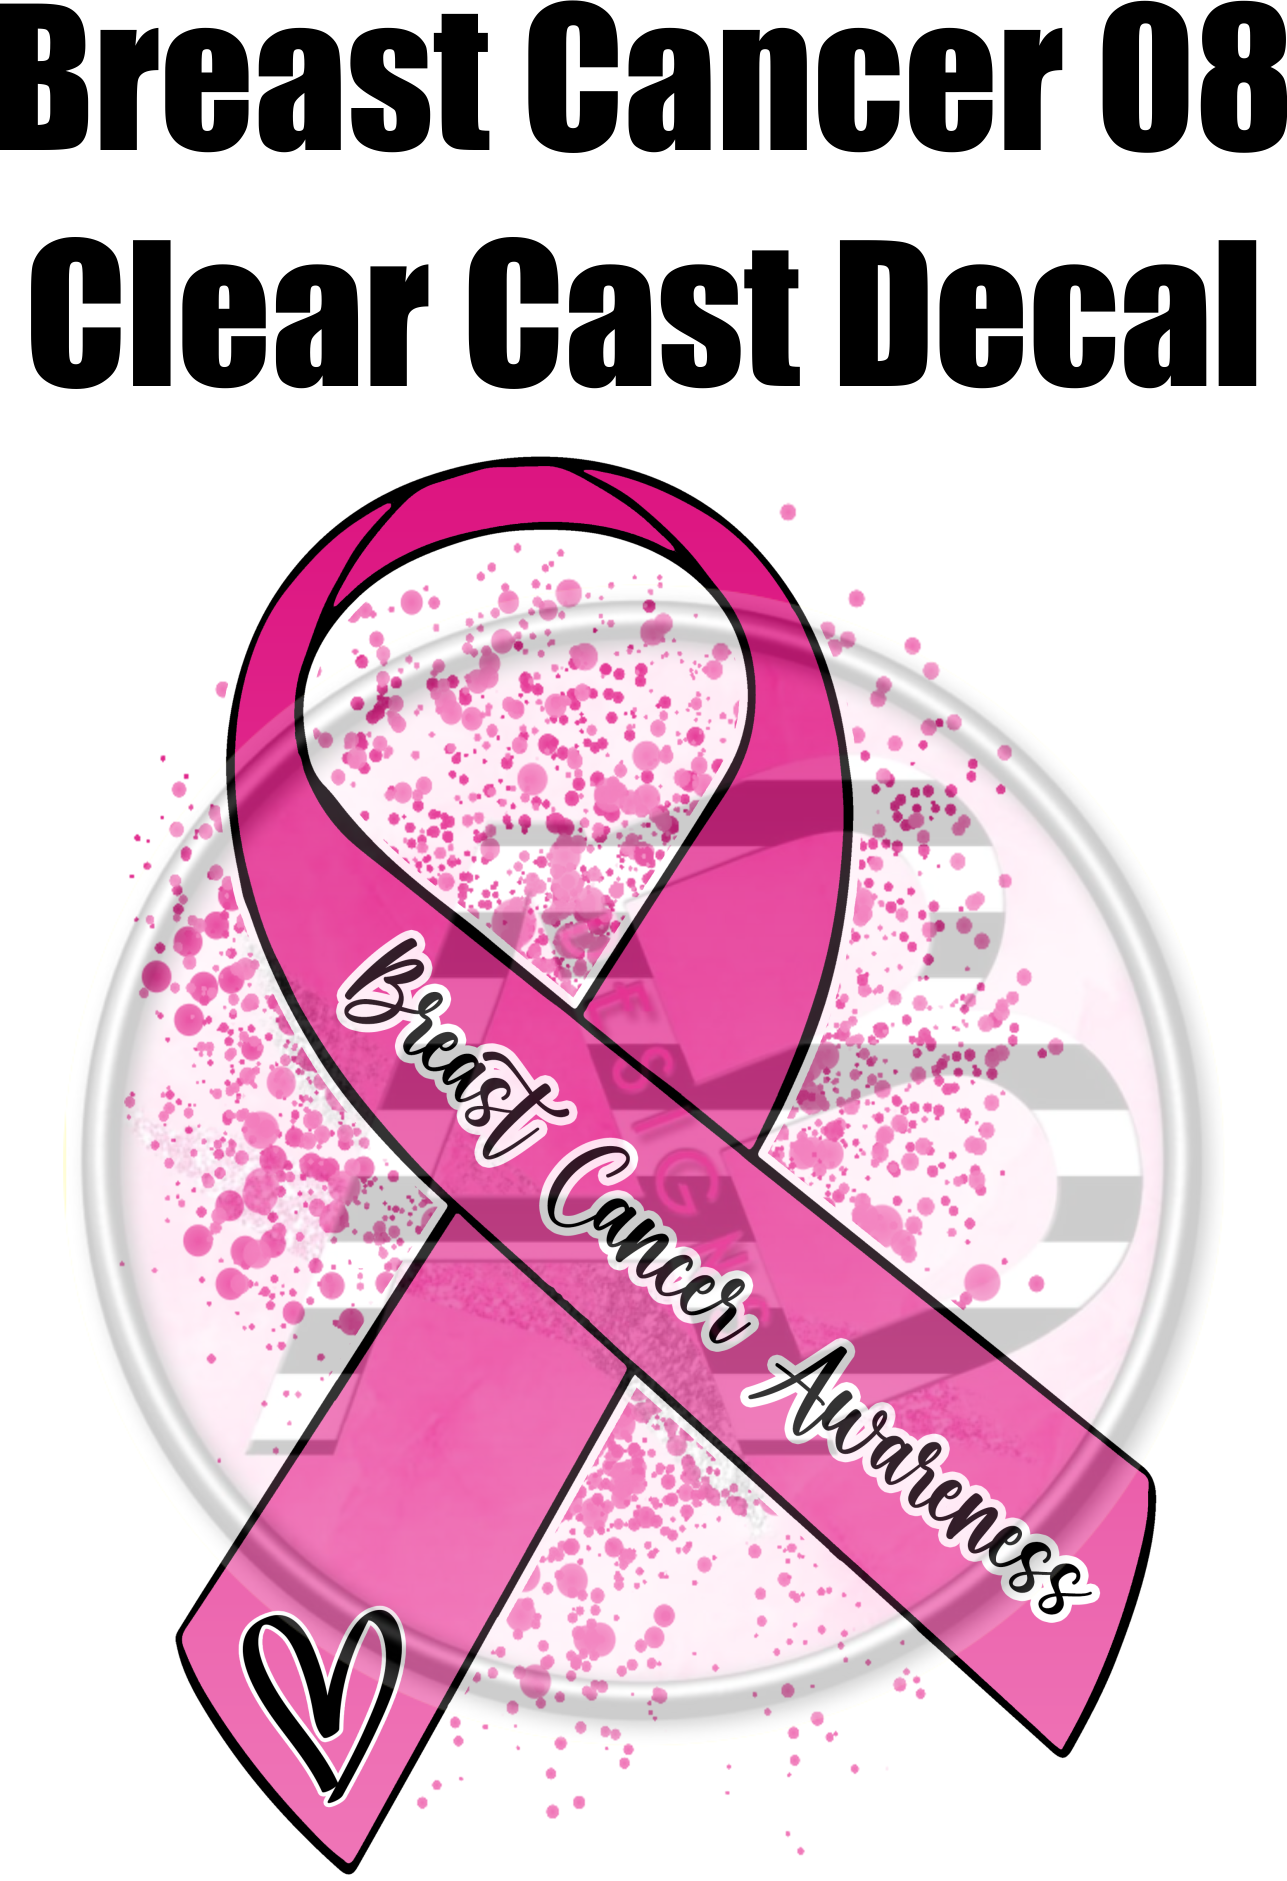 Breast Cancer 08 - Clear Cast Decal